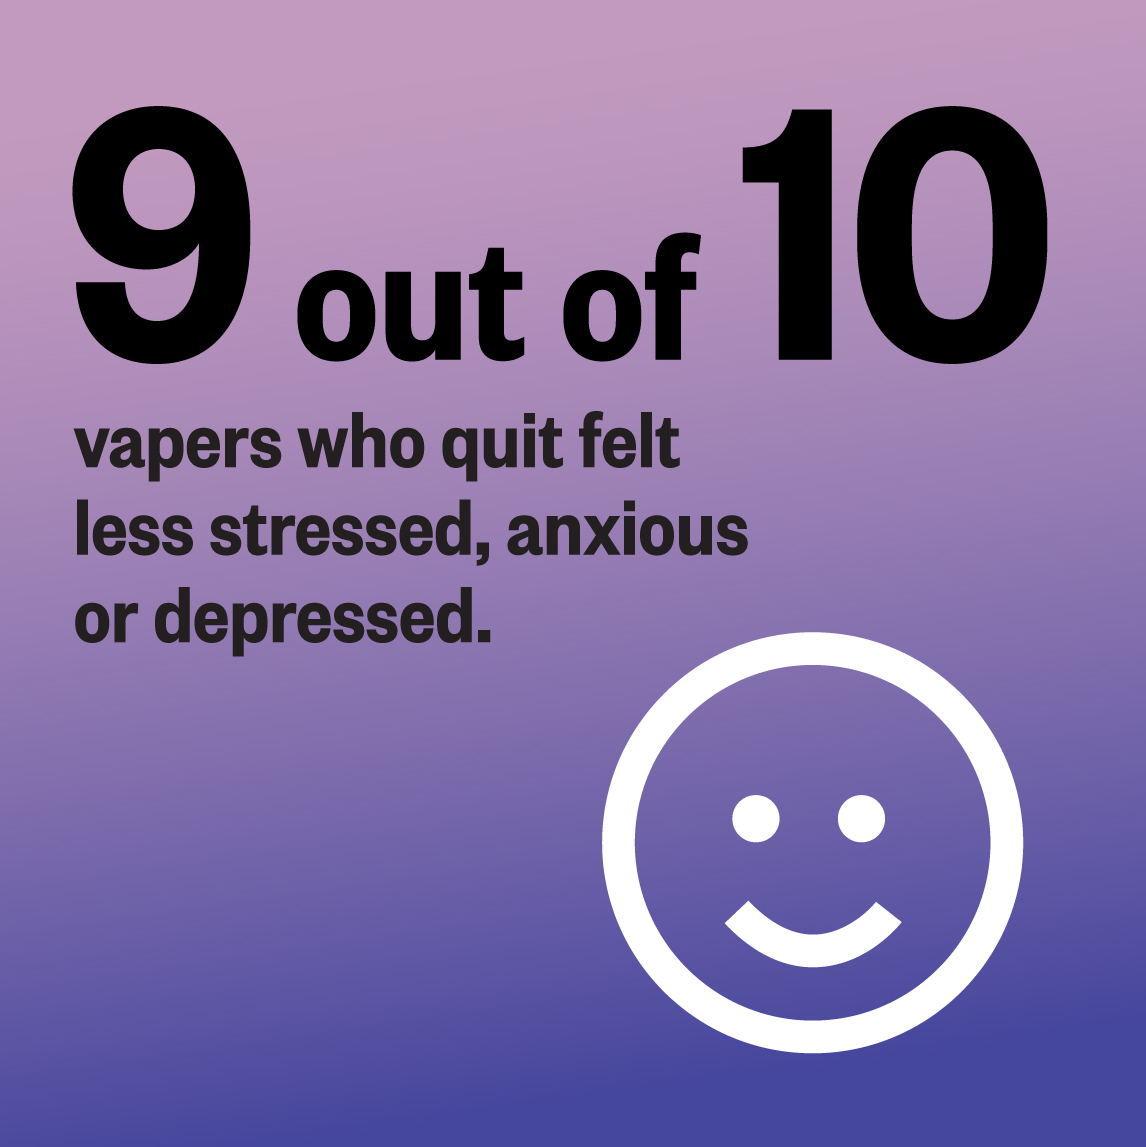 9 out of 10 vapers who quit felt less stressed, anxious or depressed.